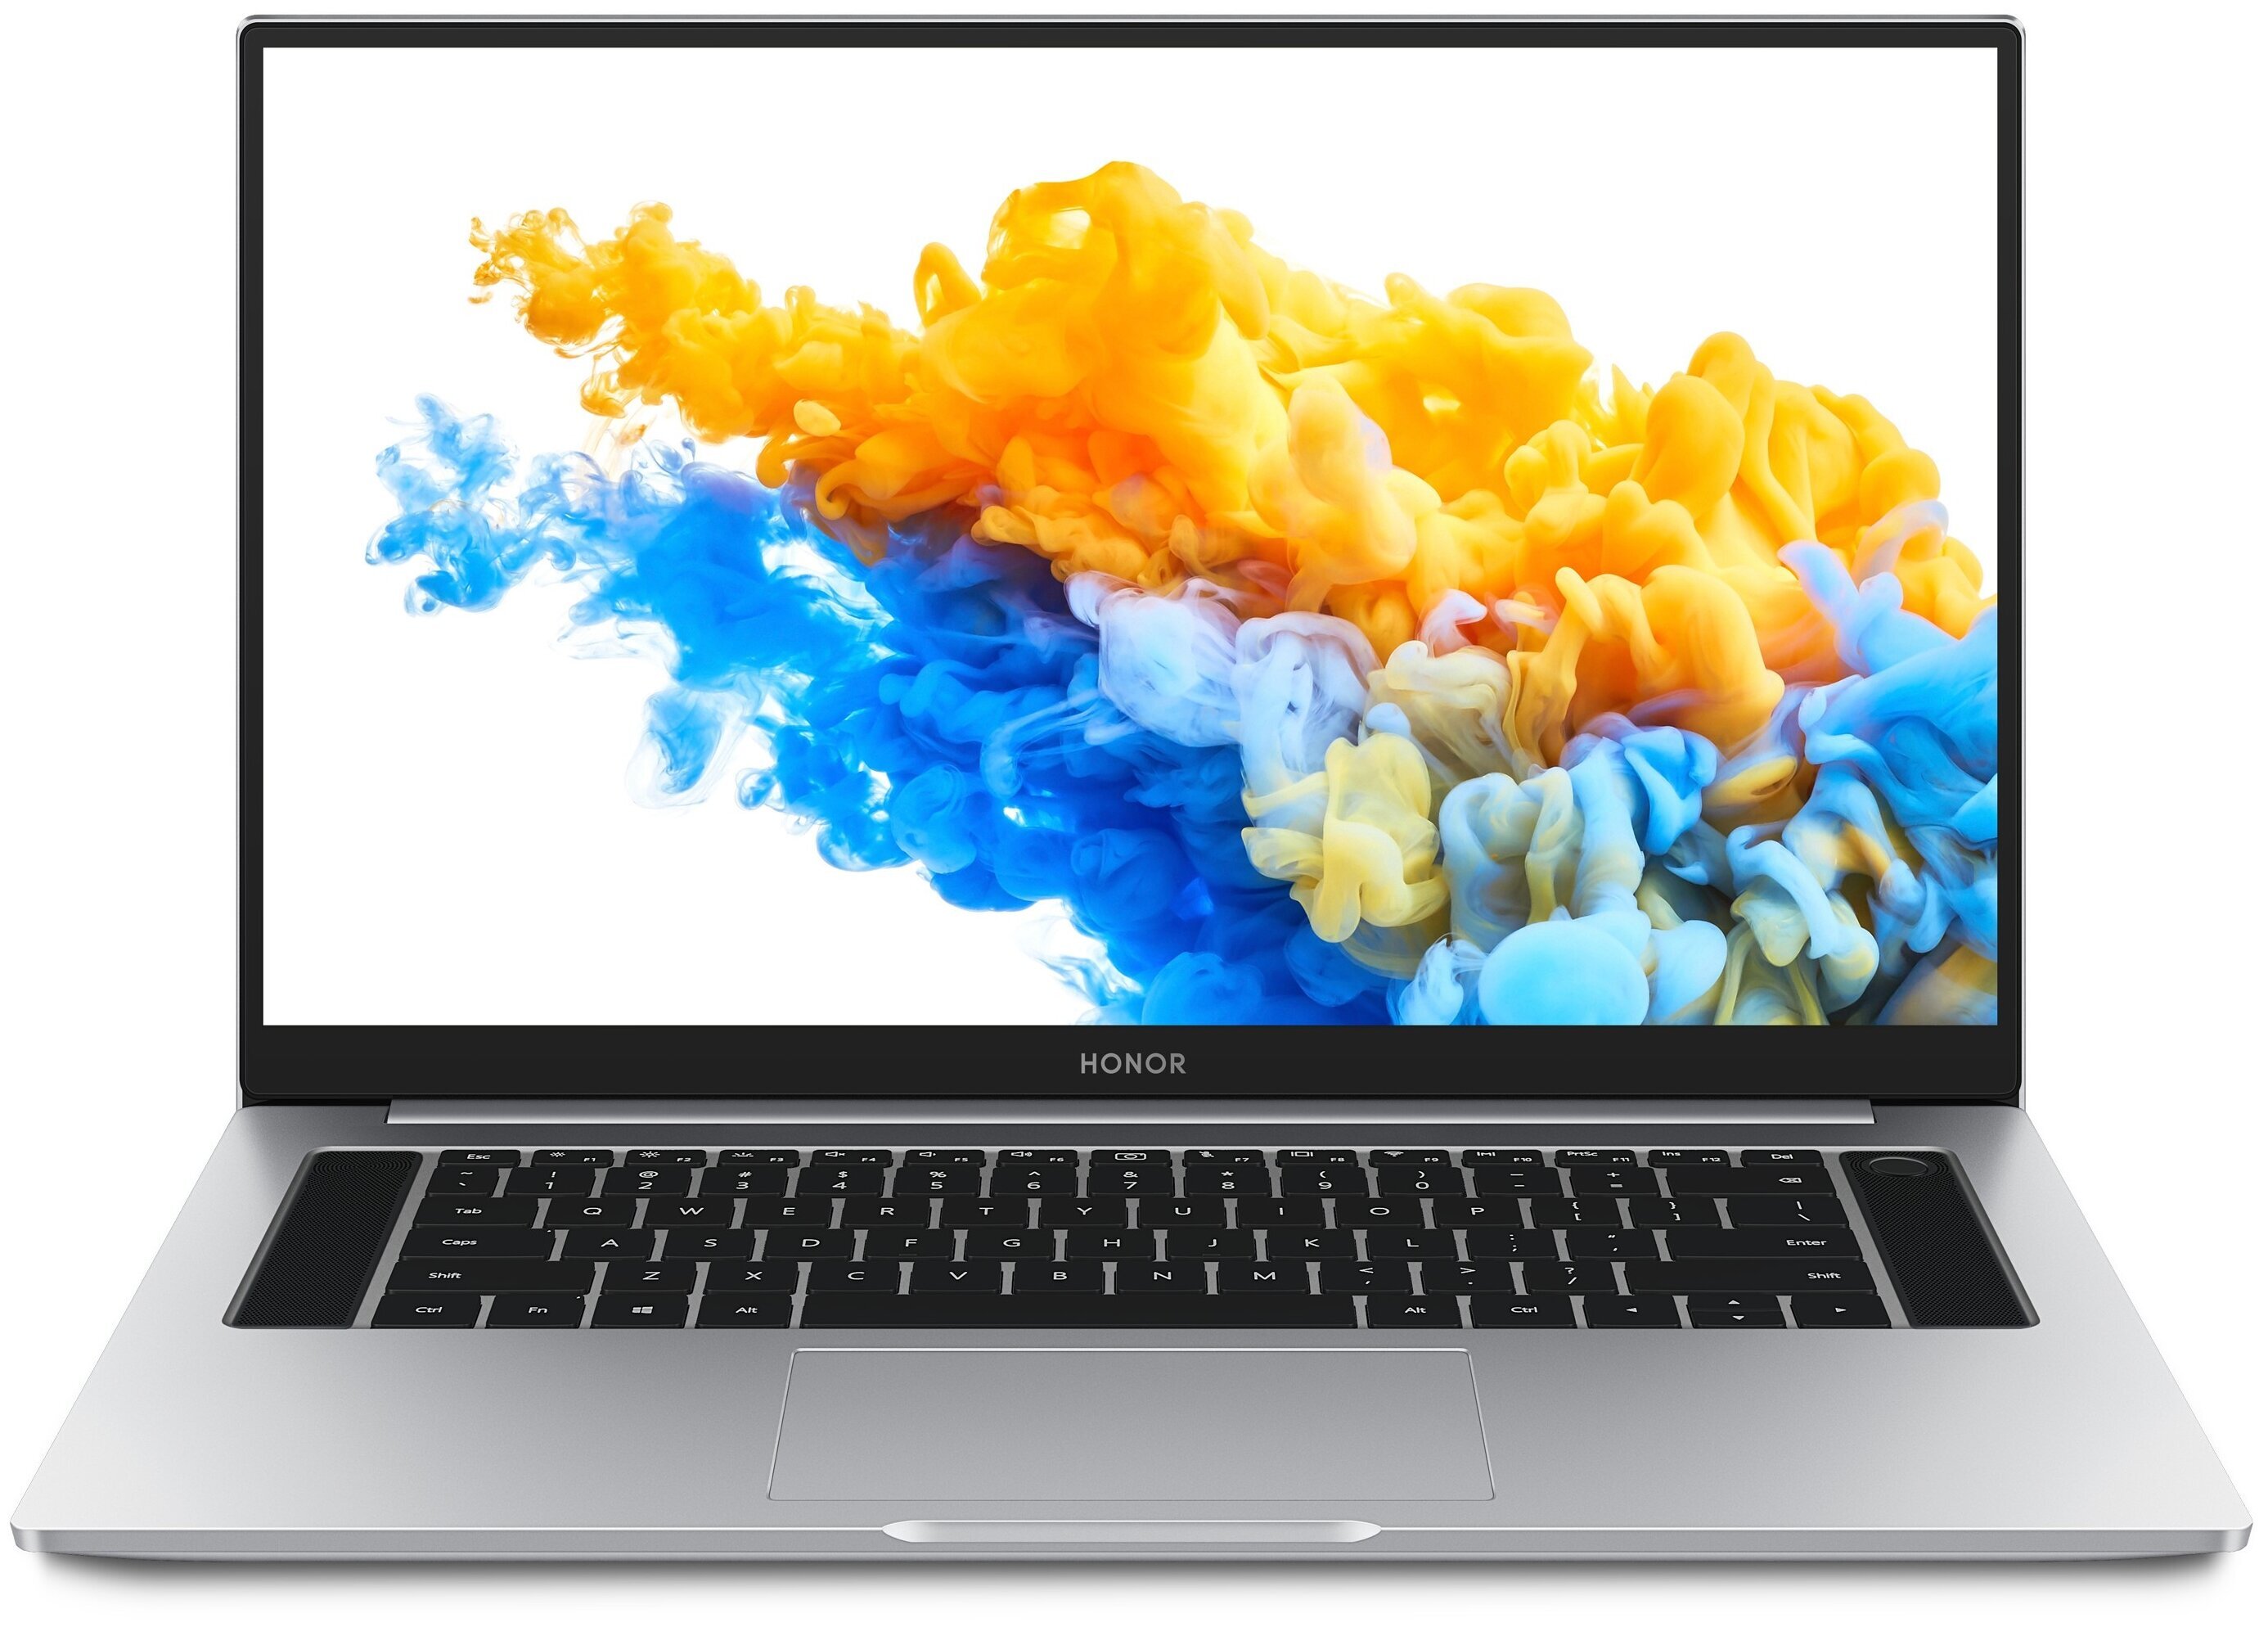 Honor magicbook 10. Ноутбук Honor MAGICBOOK Pro 16. Honor MAGICBOOK Pro 16.1. 16.1" Ноутбук Honor MAGICBOOK Pro. Ноутбук Honor MAGICBOOK Pro HLY-w19r.